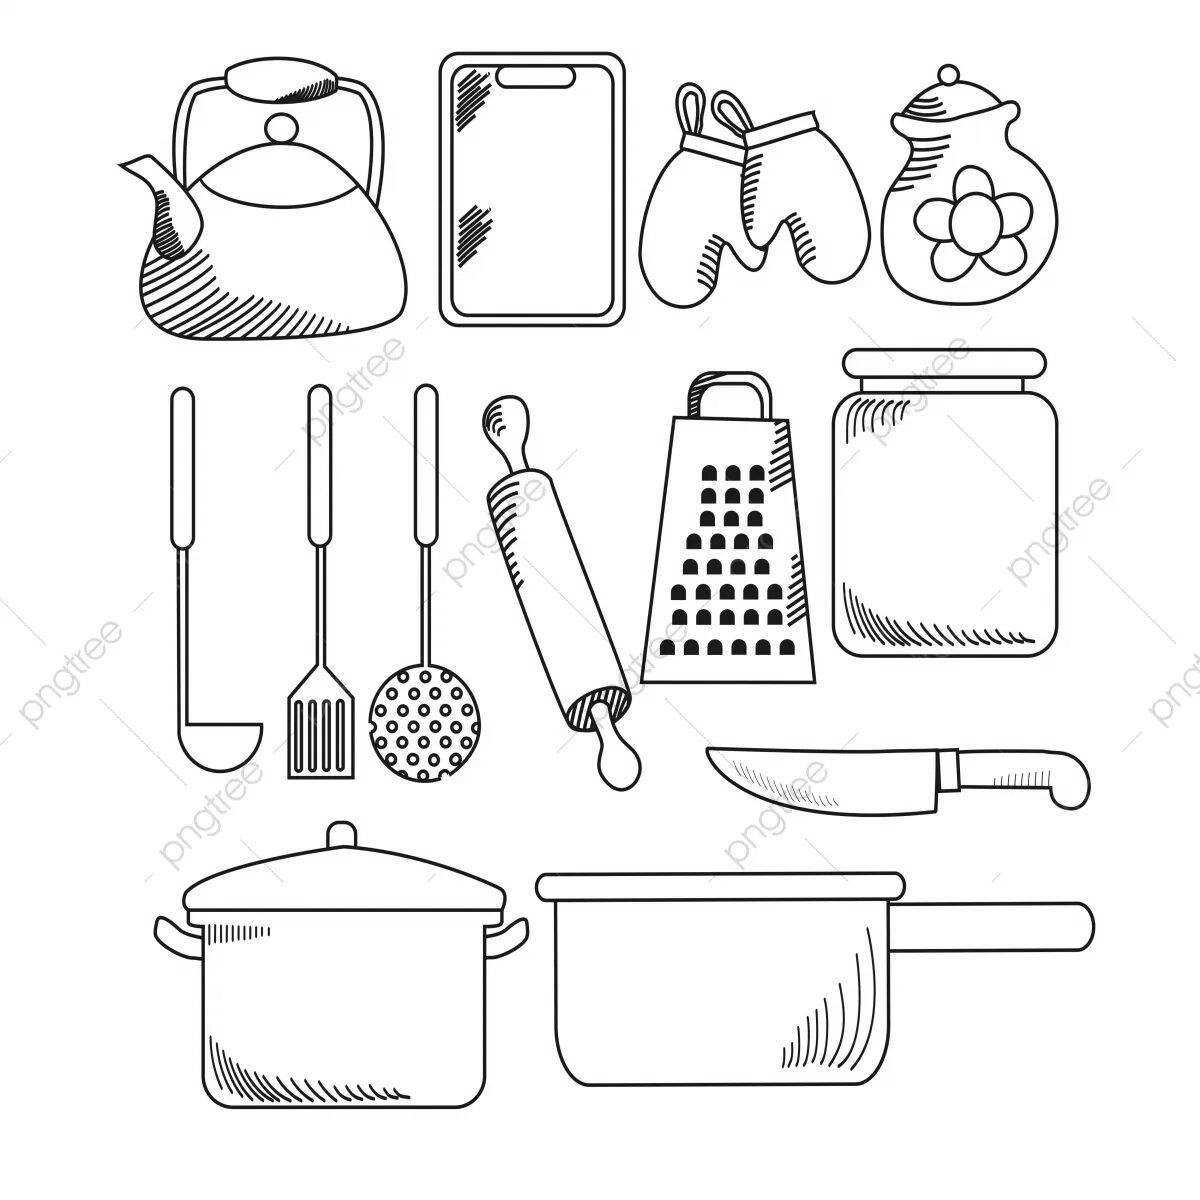 Adorable kitchen utensils coloring book for toddlers